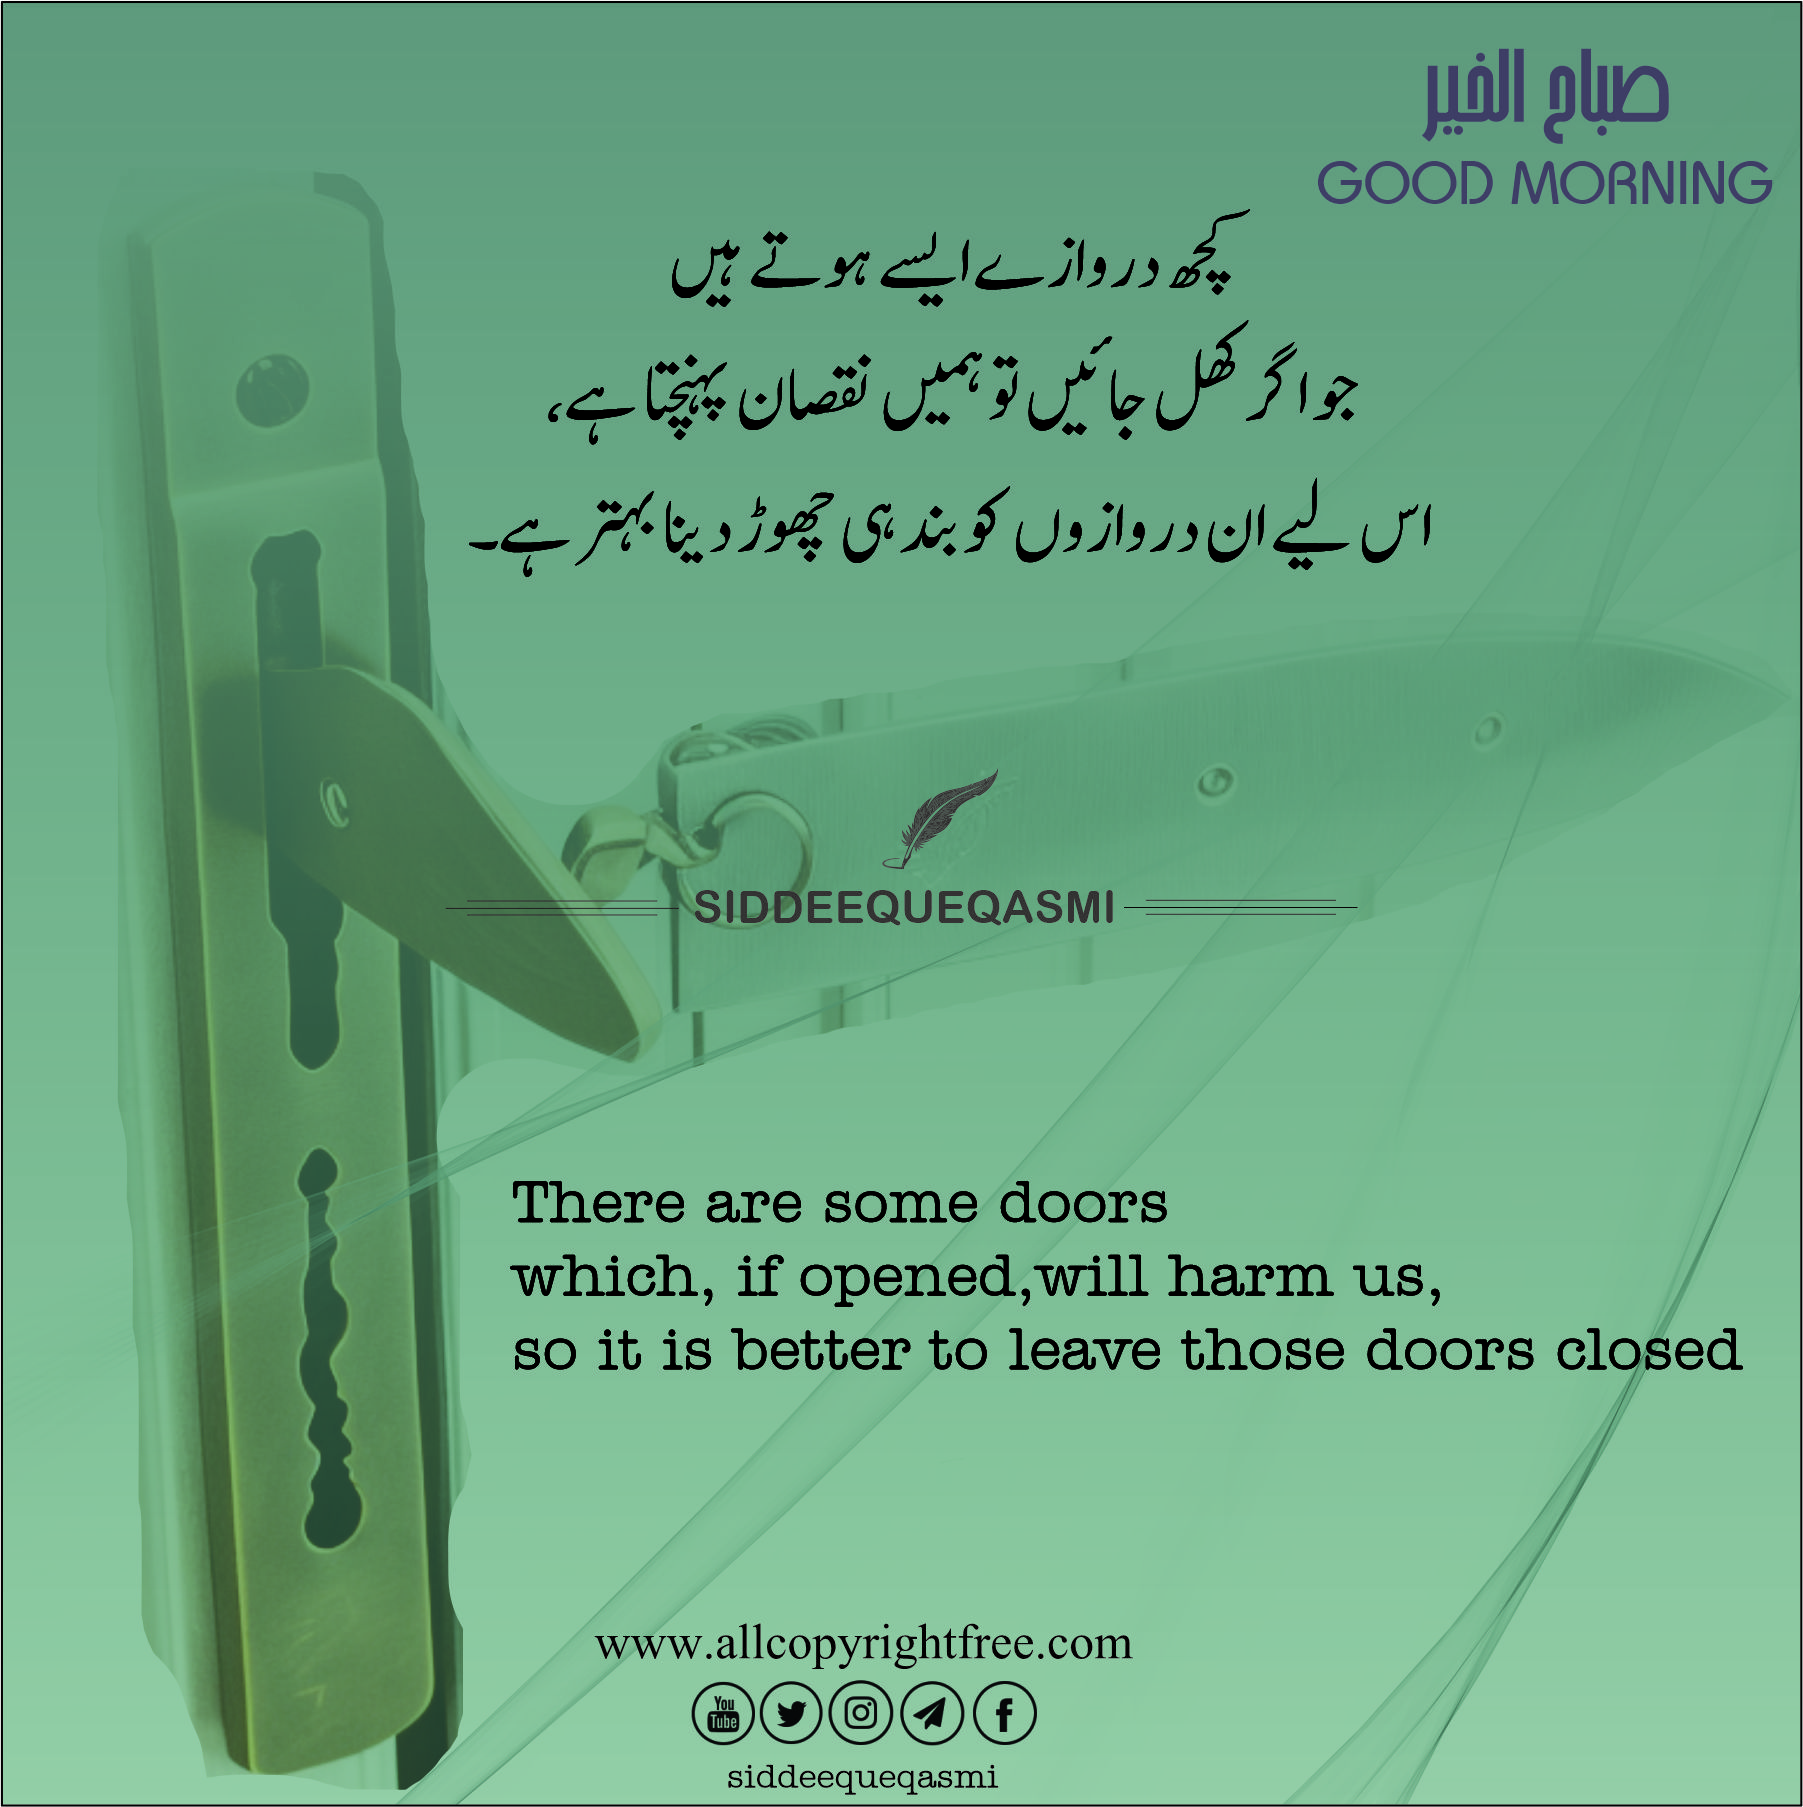 There are some doors which, if opened, will harm us, so it is better to leave those doors closed